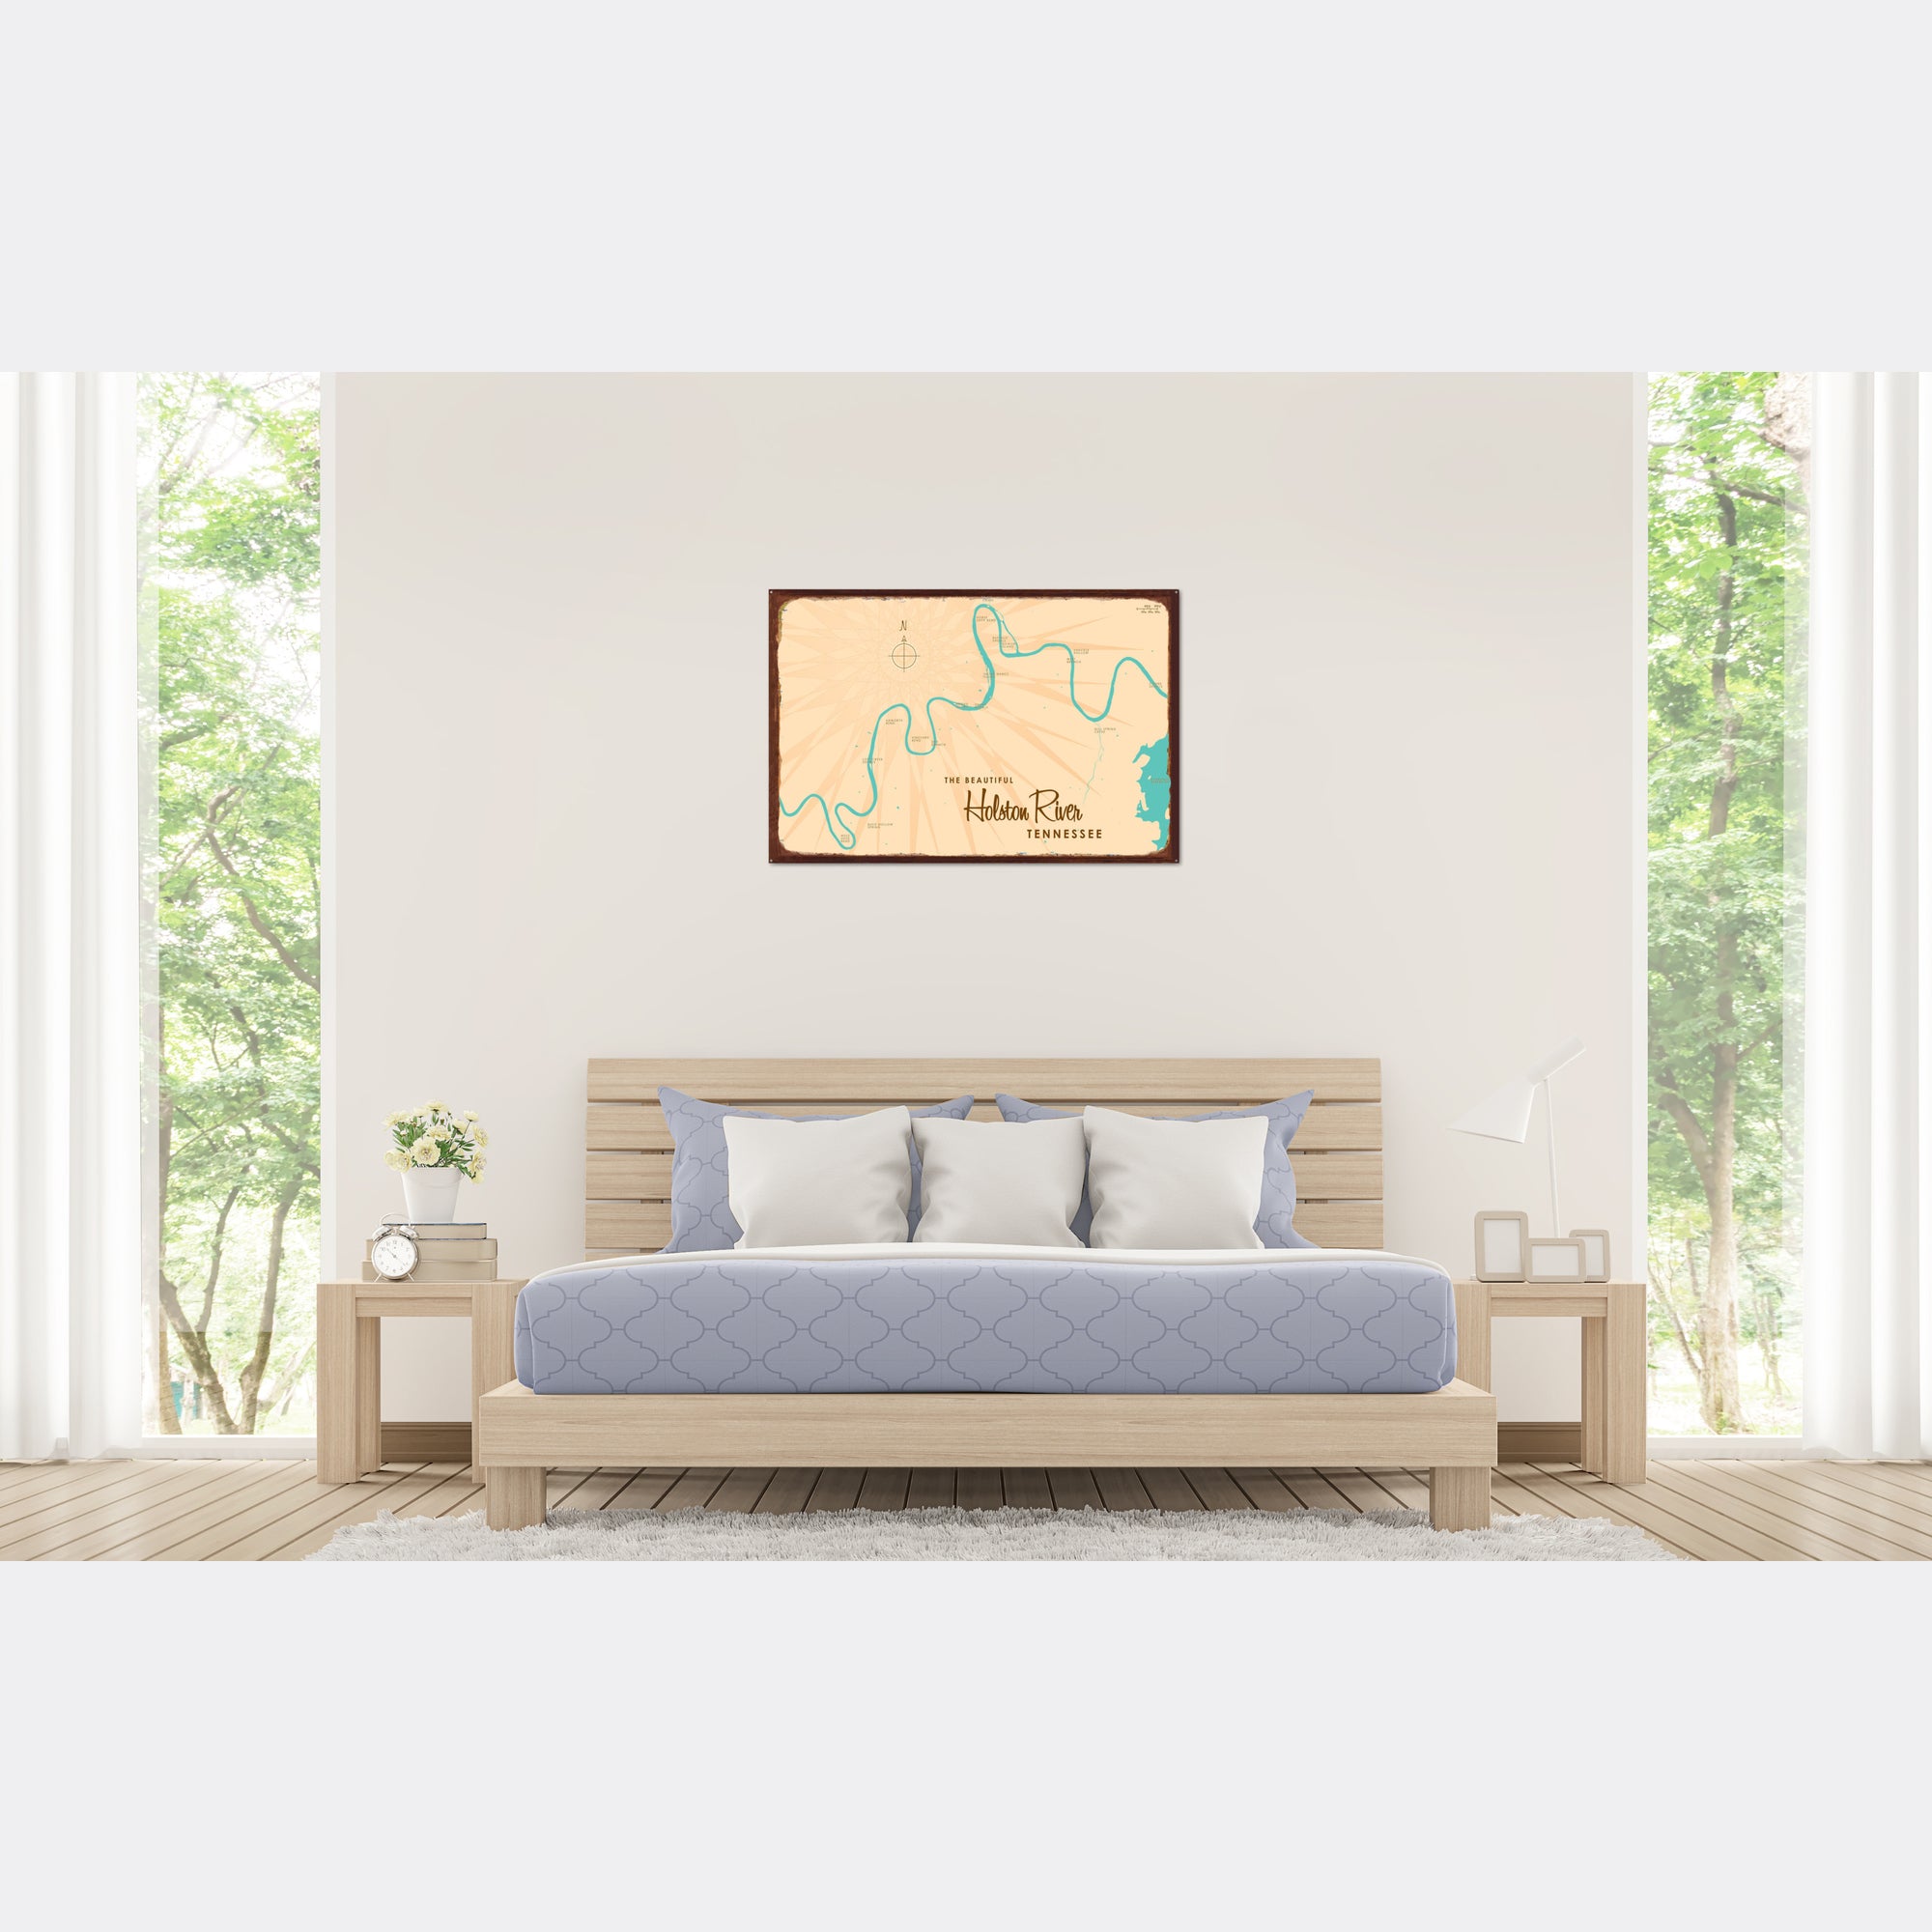 Holston River Tennessee, Rustic Metal Sign Map Art